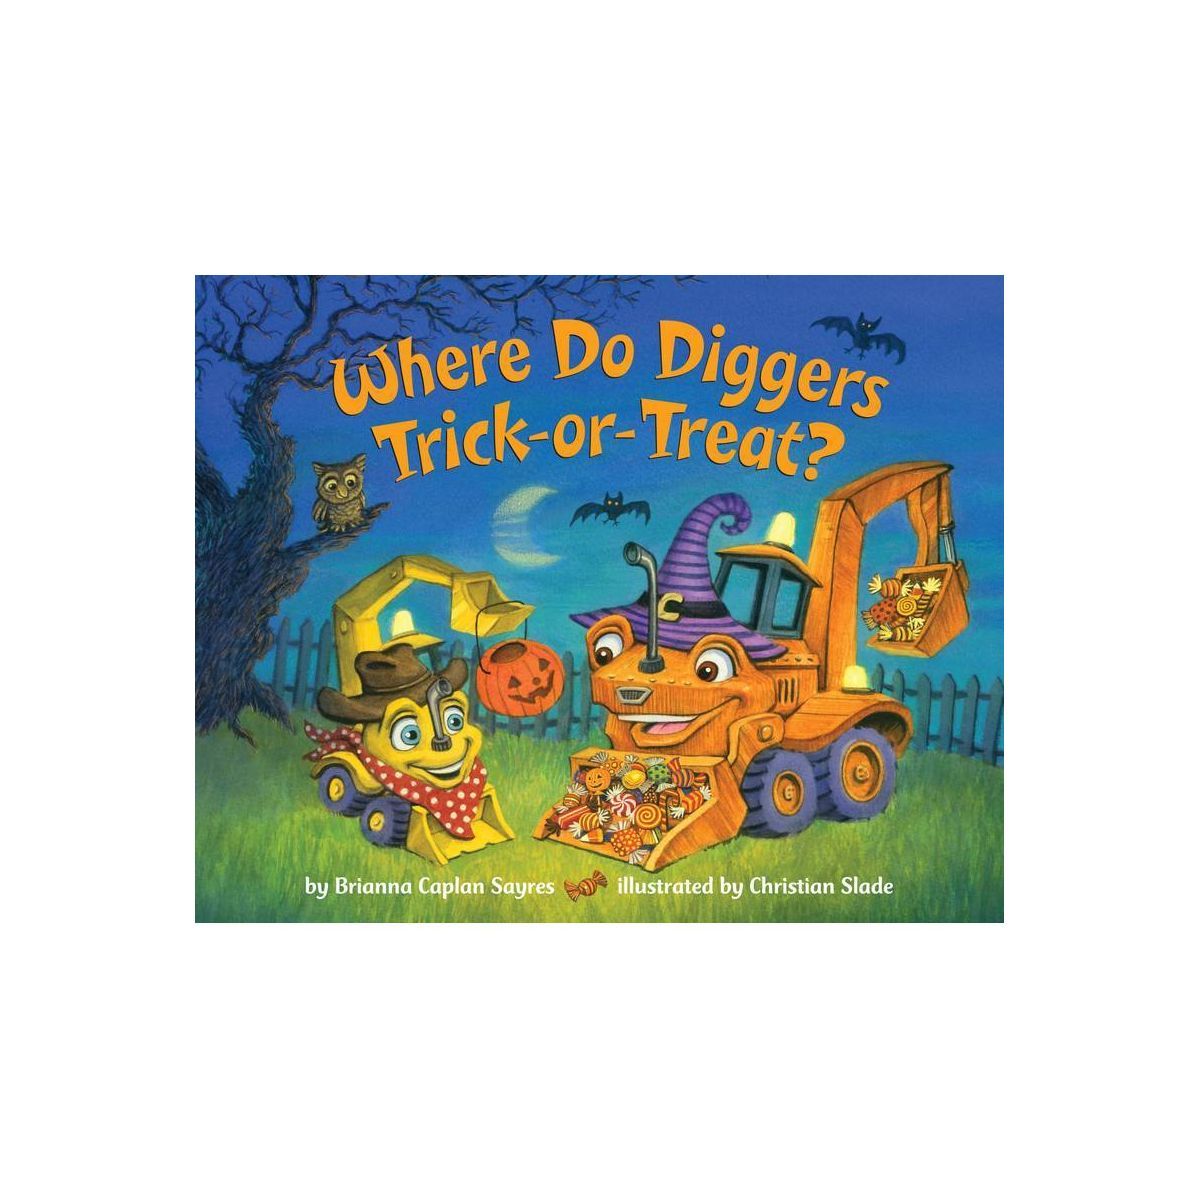 Where Do Diggers Trick-Or-Treat? - (Where Do...Series) by Brianna Caplan Sayres | Target